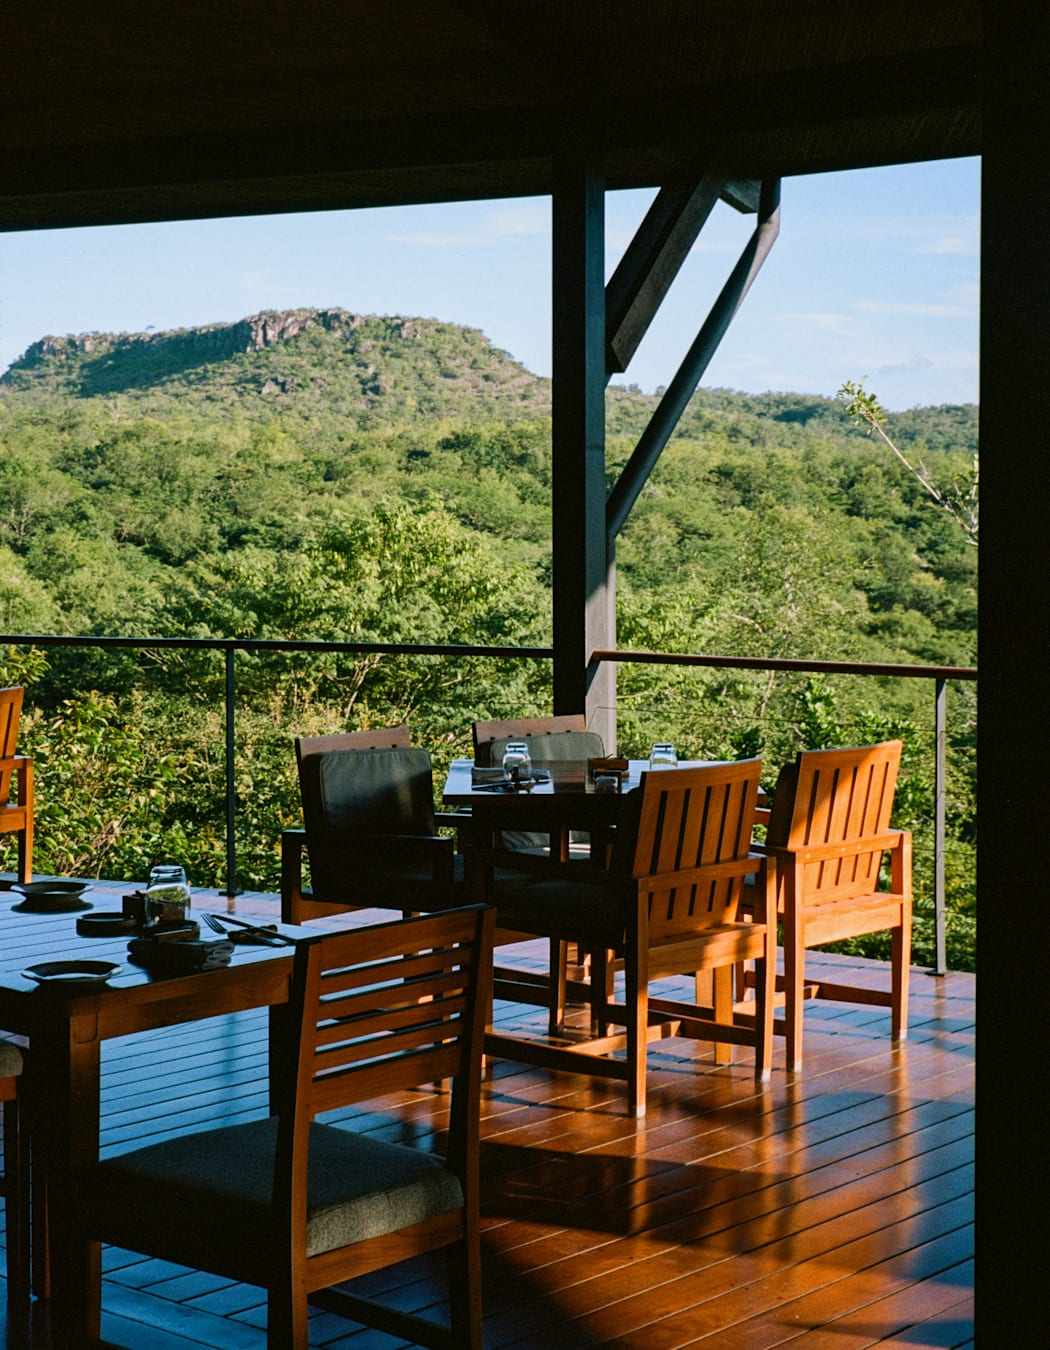 Wooden tables in a restaurant overlooking the treetops of a forest.